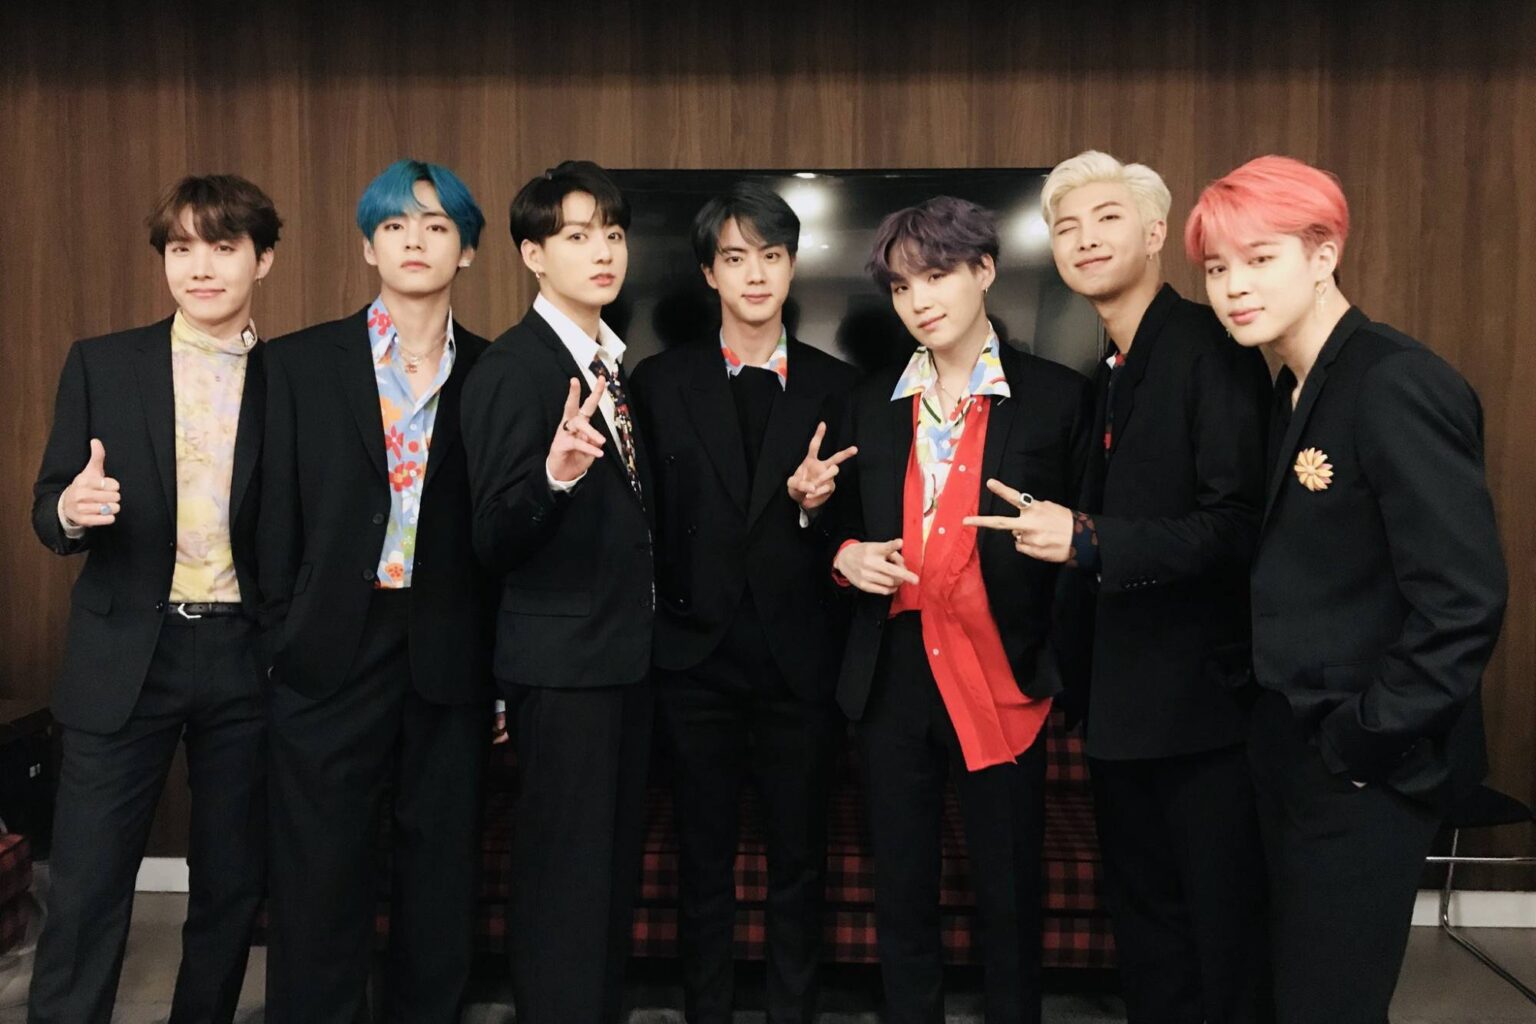 The love lives of BTS have been scrutinized by fans. Are any of the band members in a relationship?